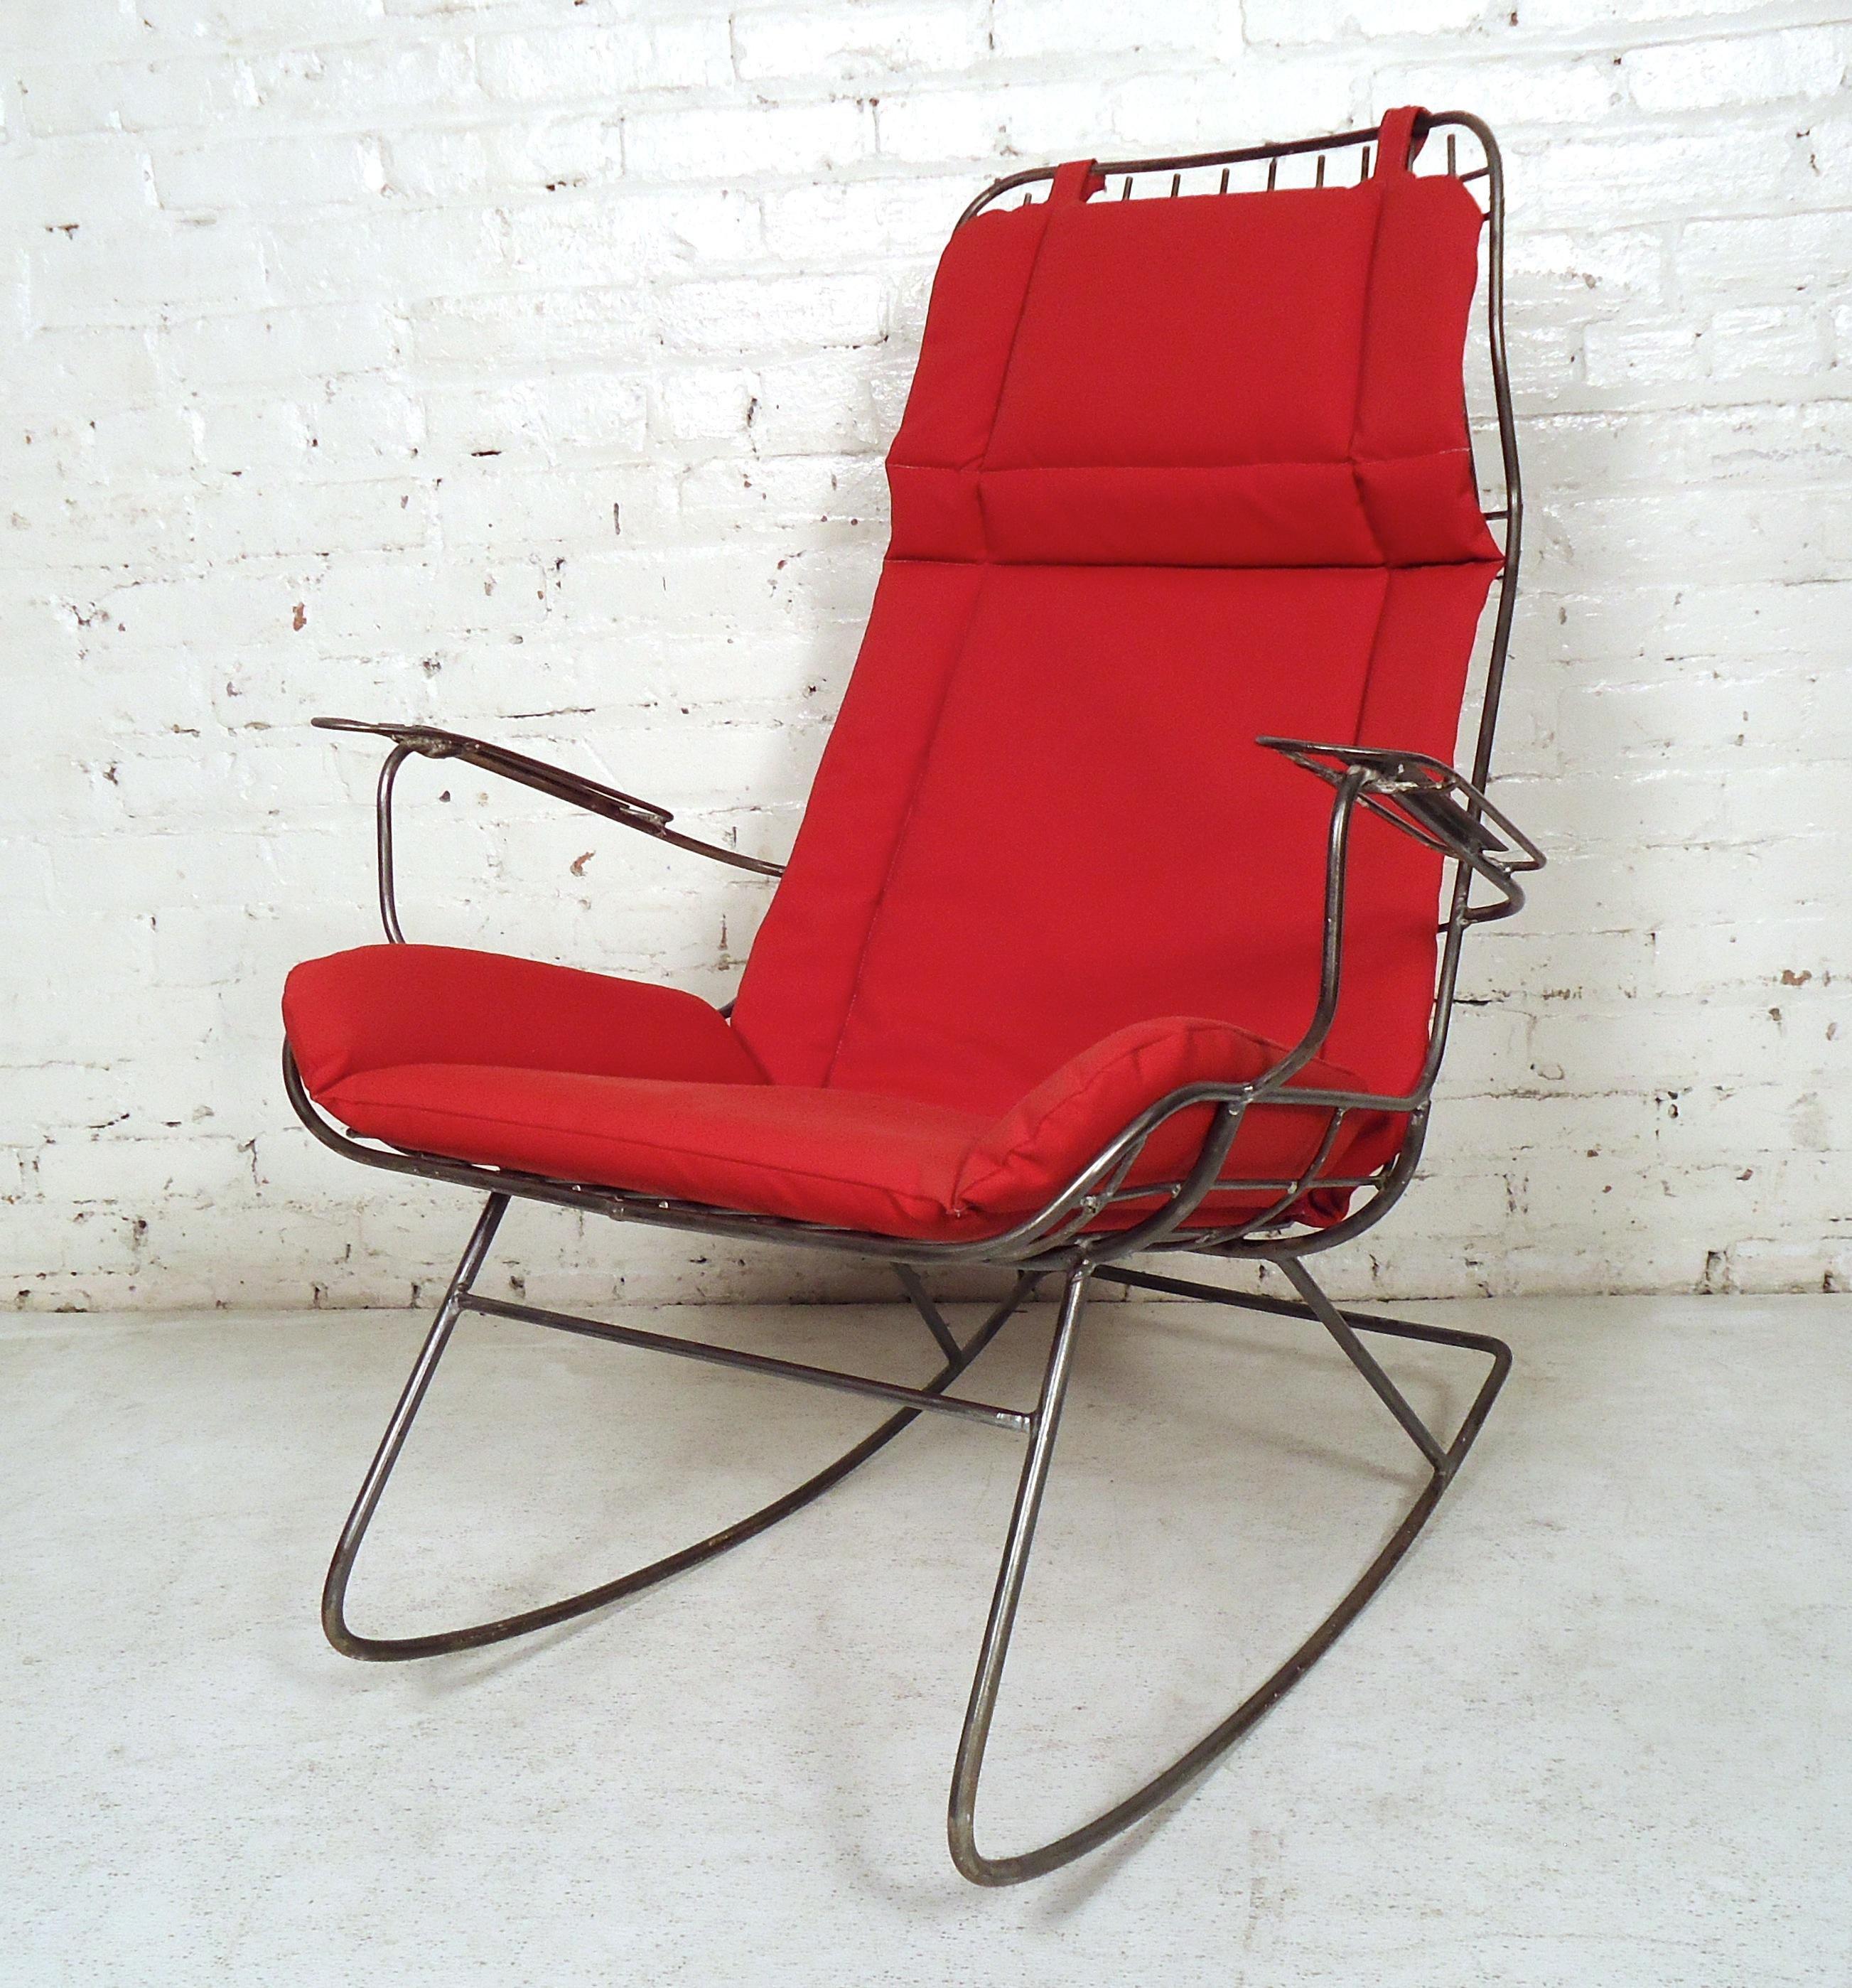 Unusual vintage modern iron rocker features red upholstered cushions.

Please confirm item location (NY or NJ) with dealer.